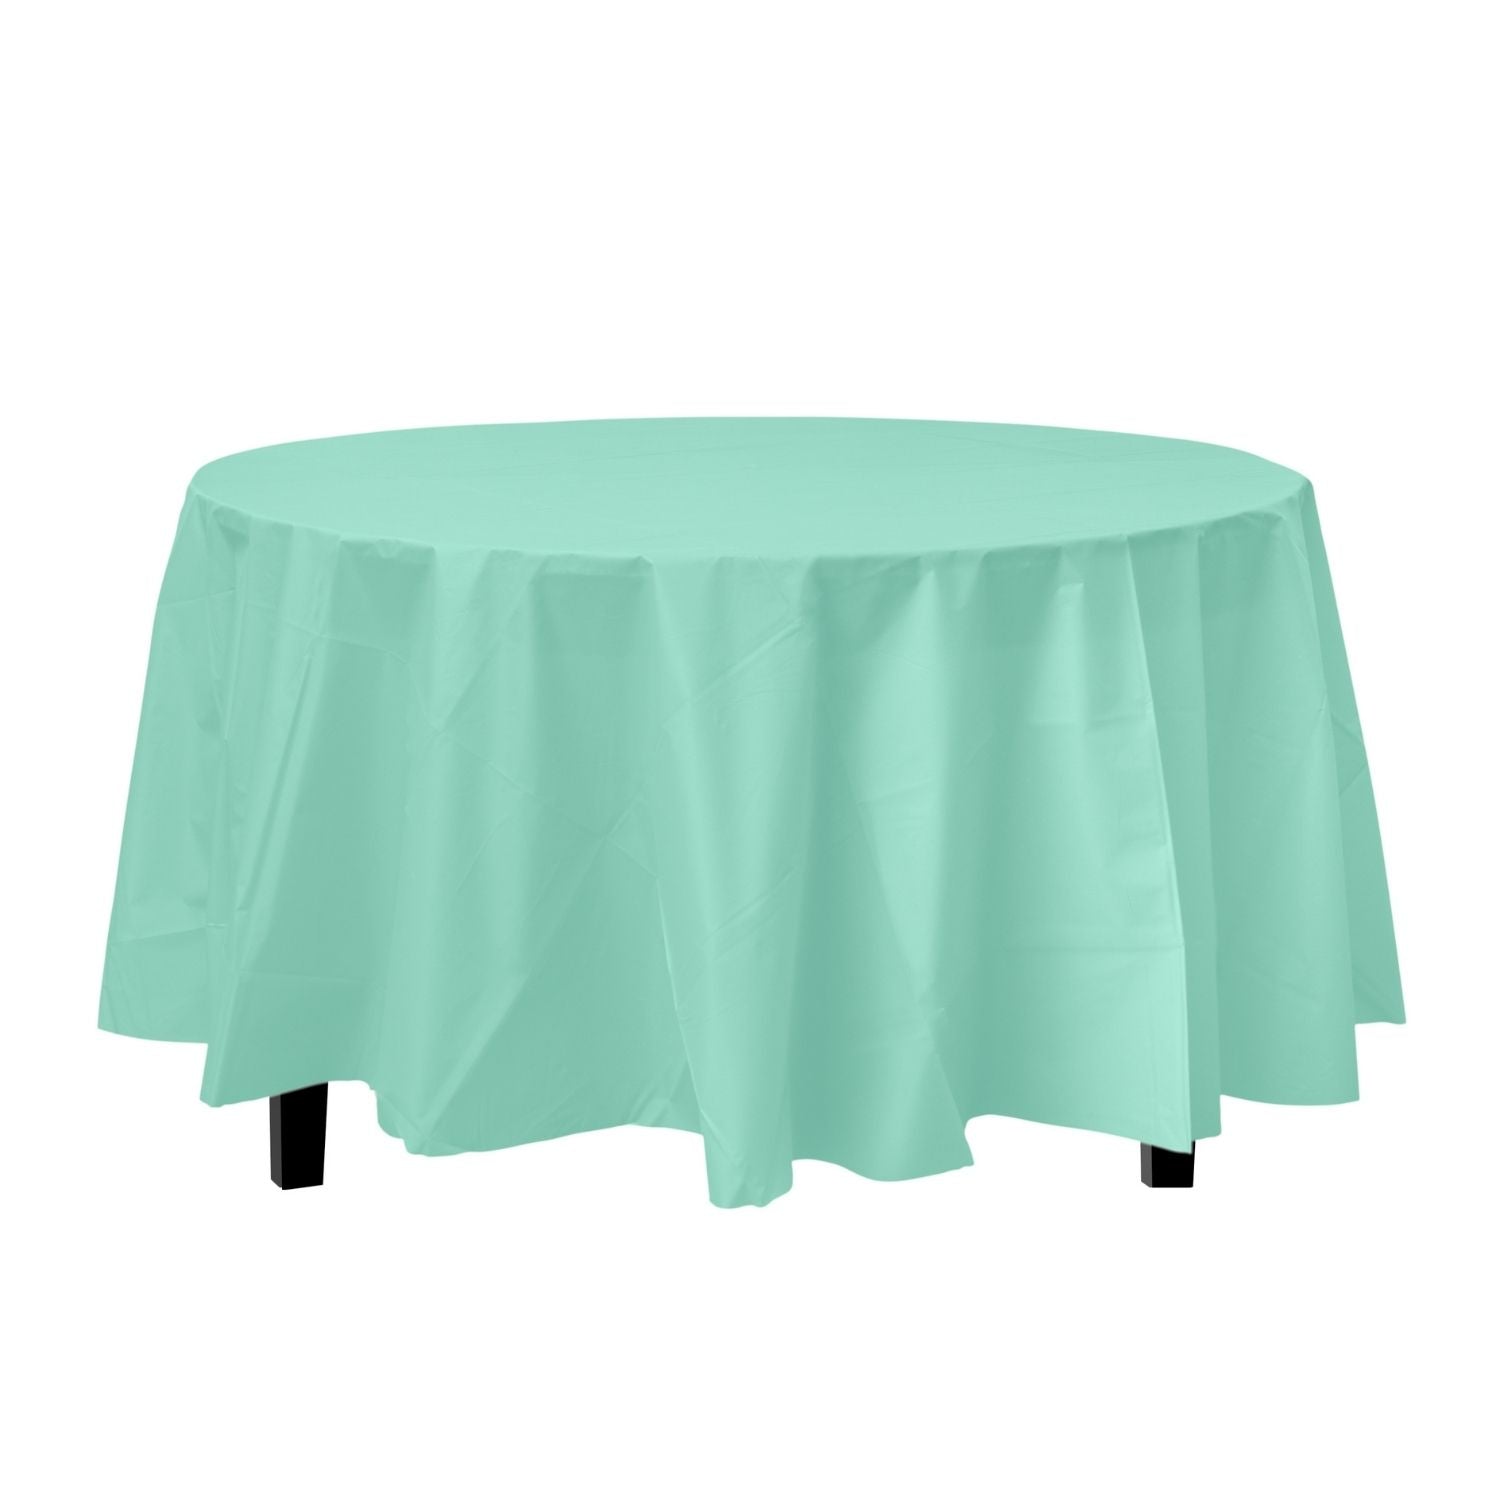 Mint Round Plastic Tablecloth | 48 Count